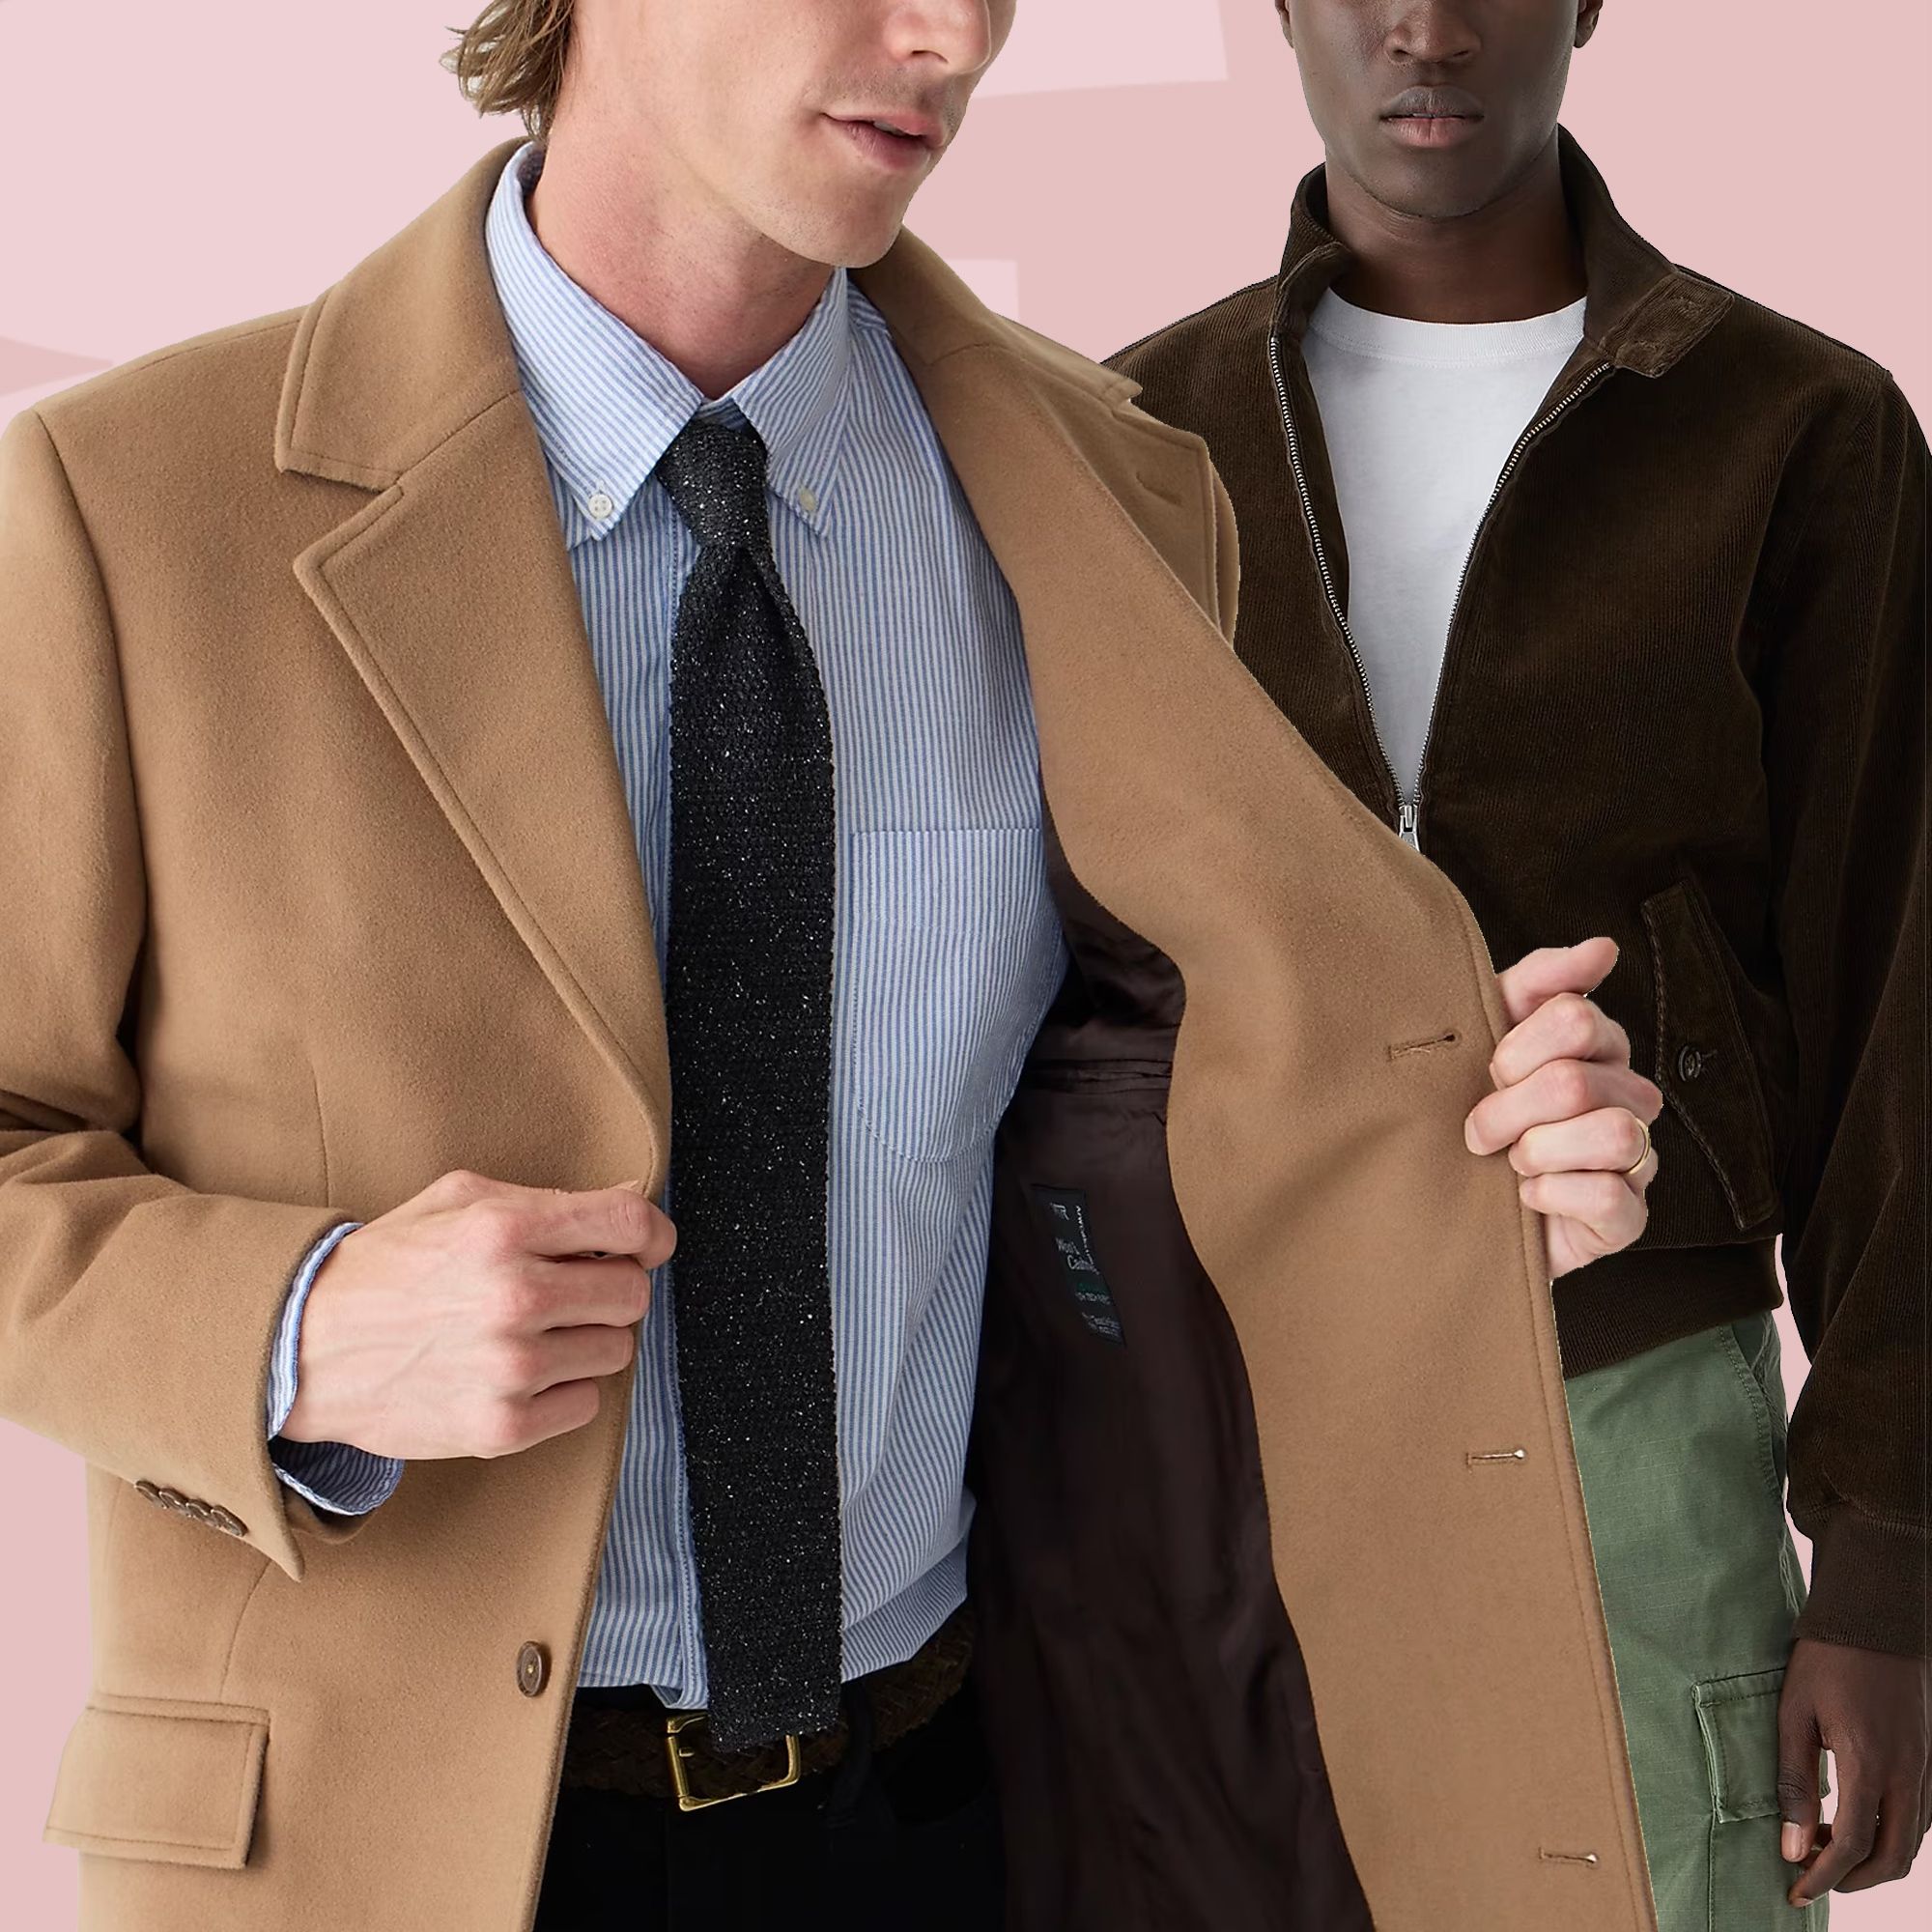 J. Crew's Sale Section Is Stocked With Winter Favorites at 70% Off